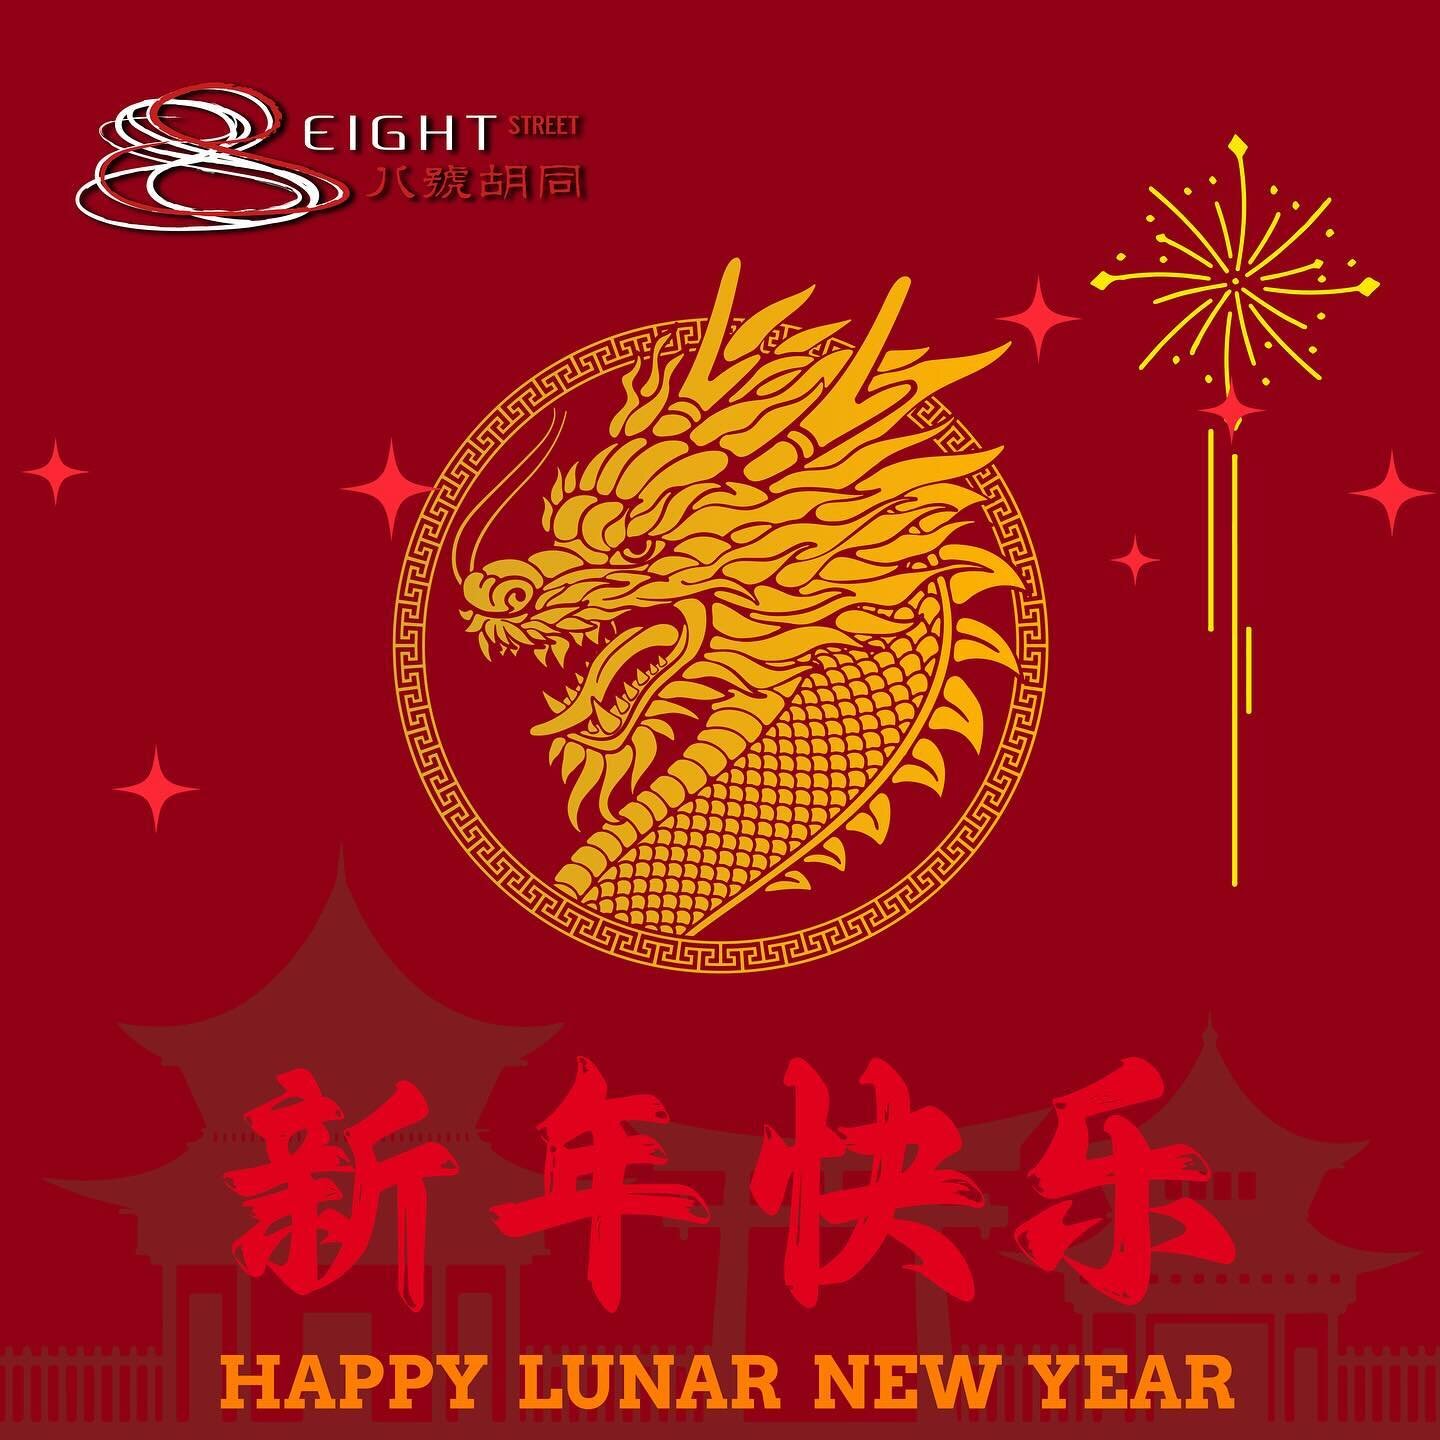 Happy Lunar New Year!🎆

Don&rsquo;t forget about the lion dance show tomorrow lunch time at 8 street😜